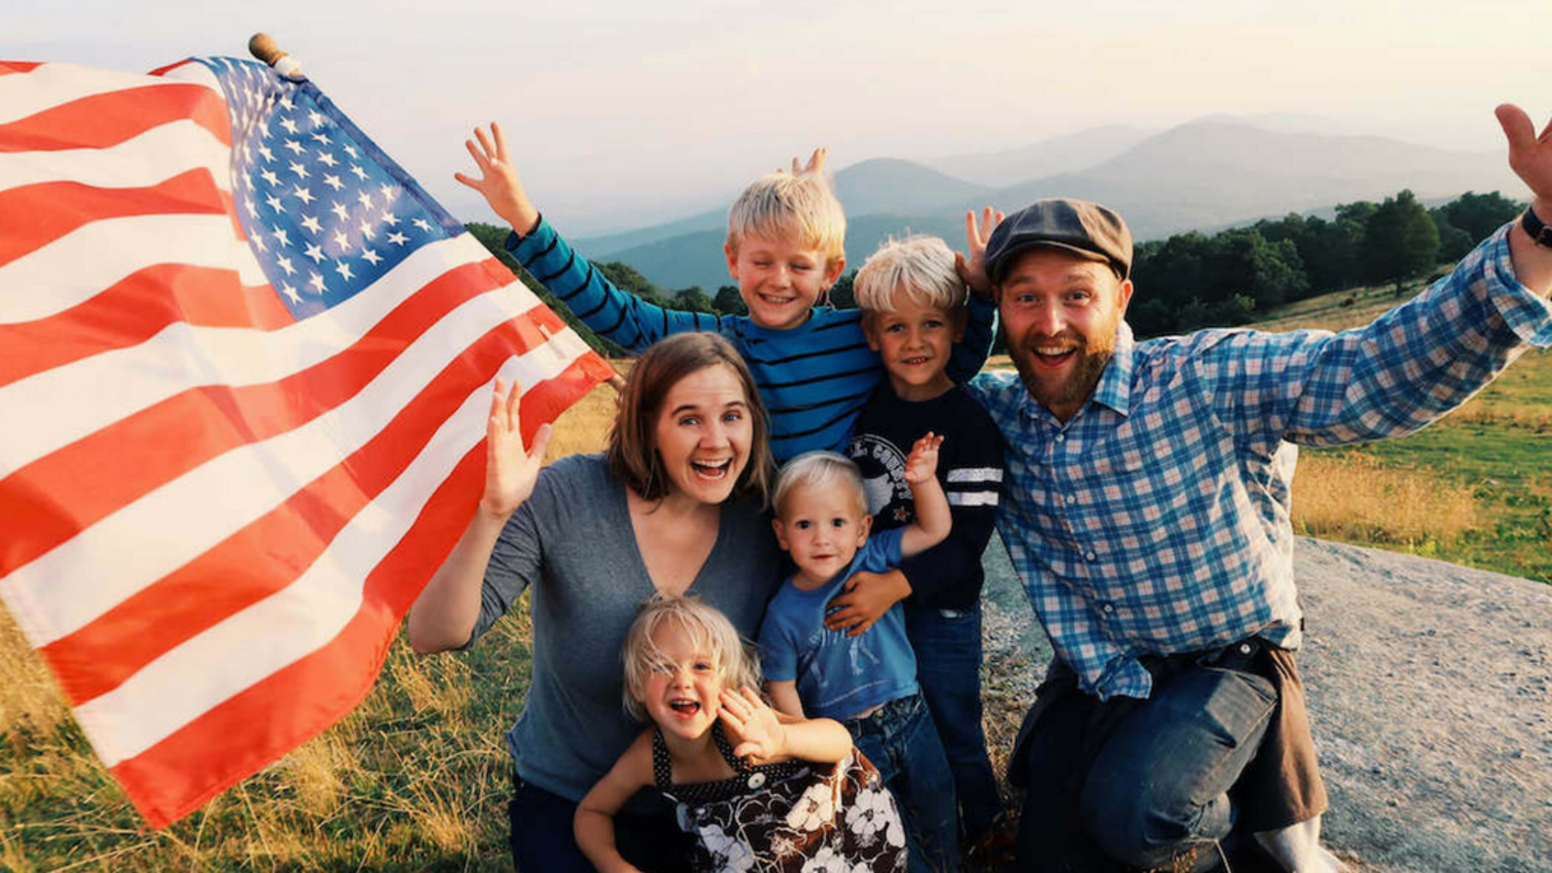 TOP 5 best places for family holidays in the USA